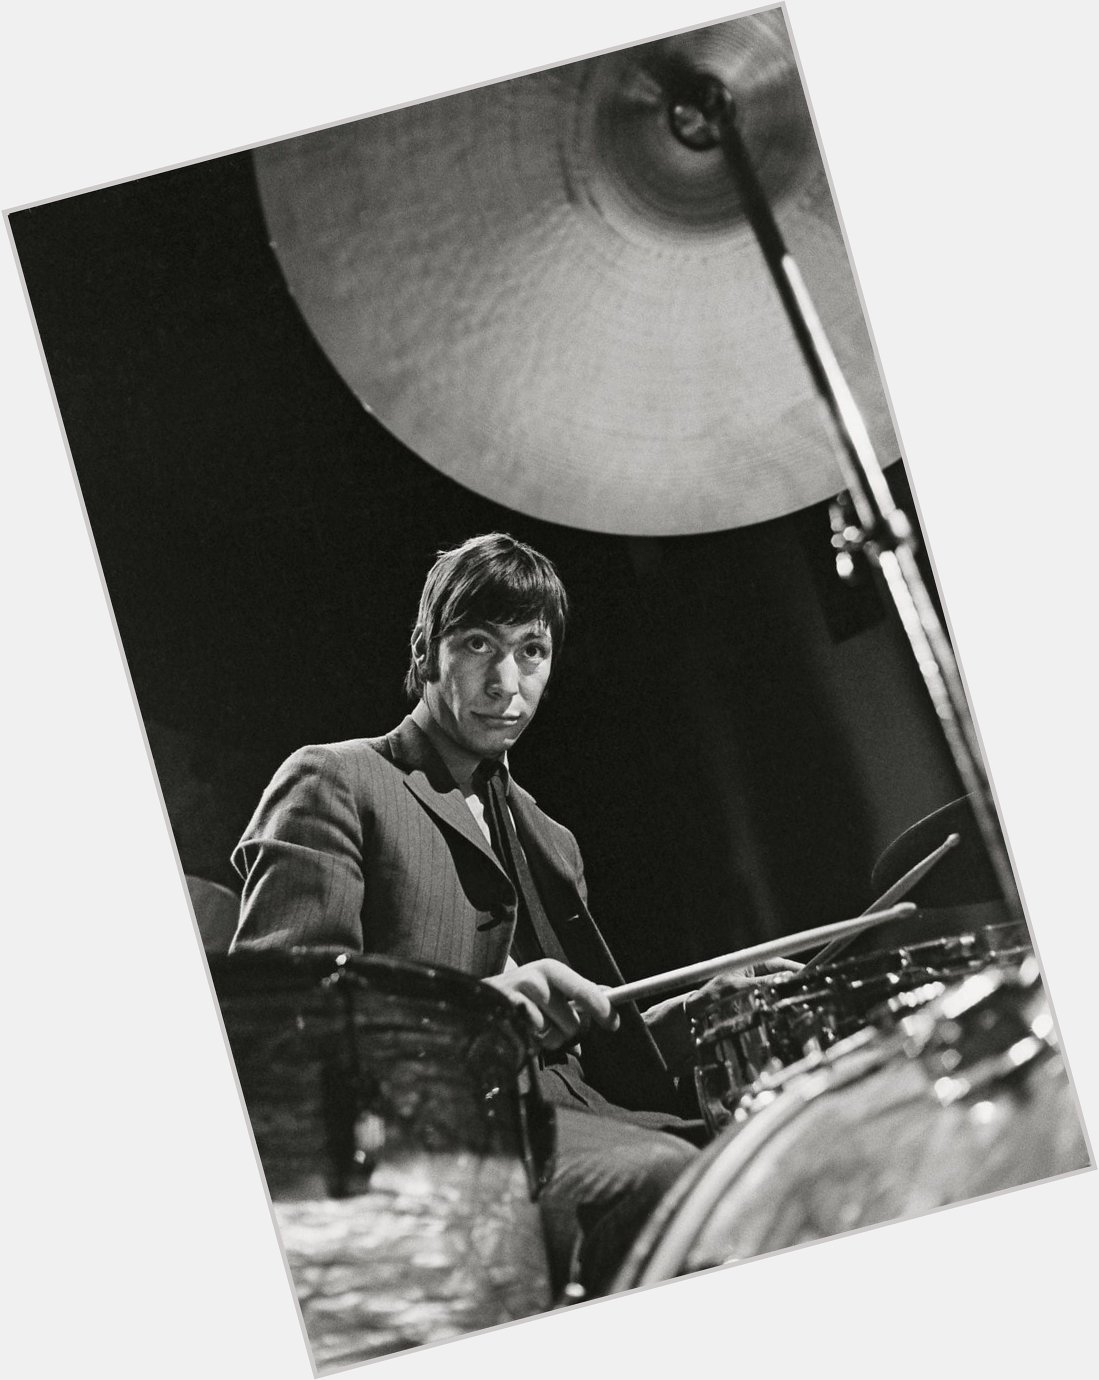 Happy 78th birthday to the heartbeat of the Stones, Charlie Watts. 